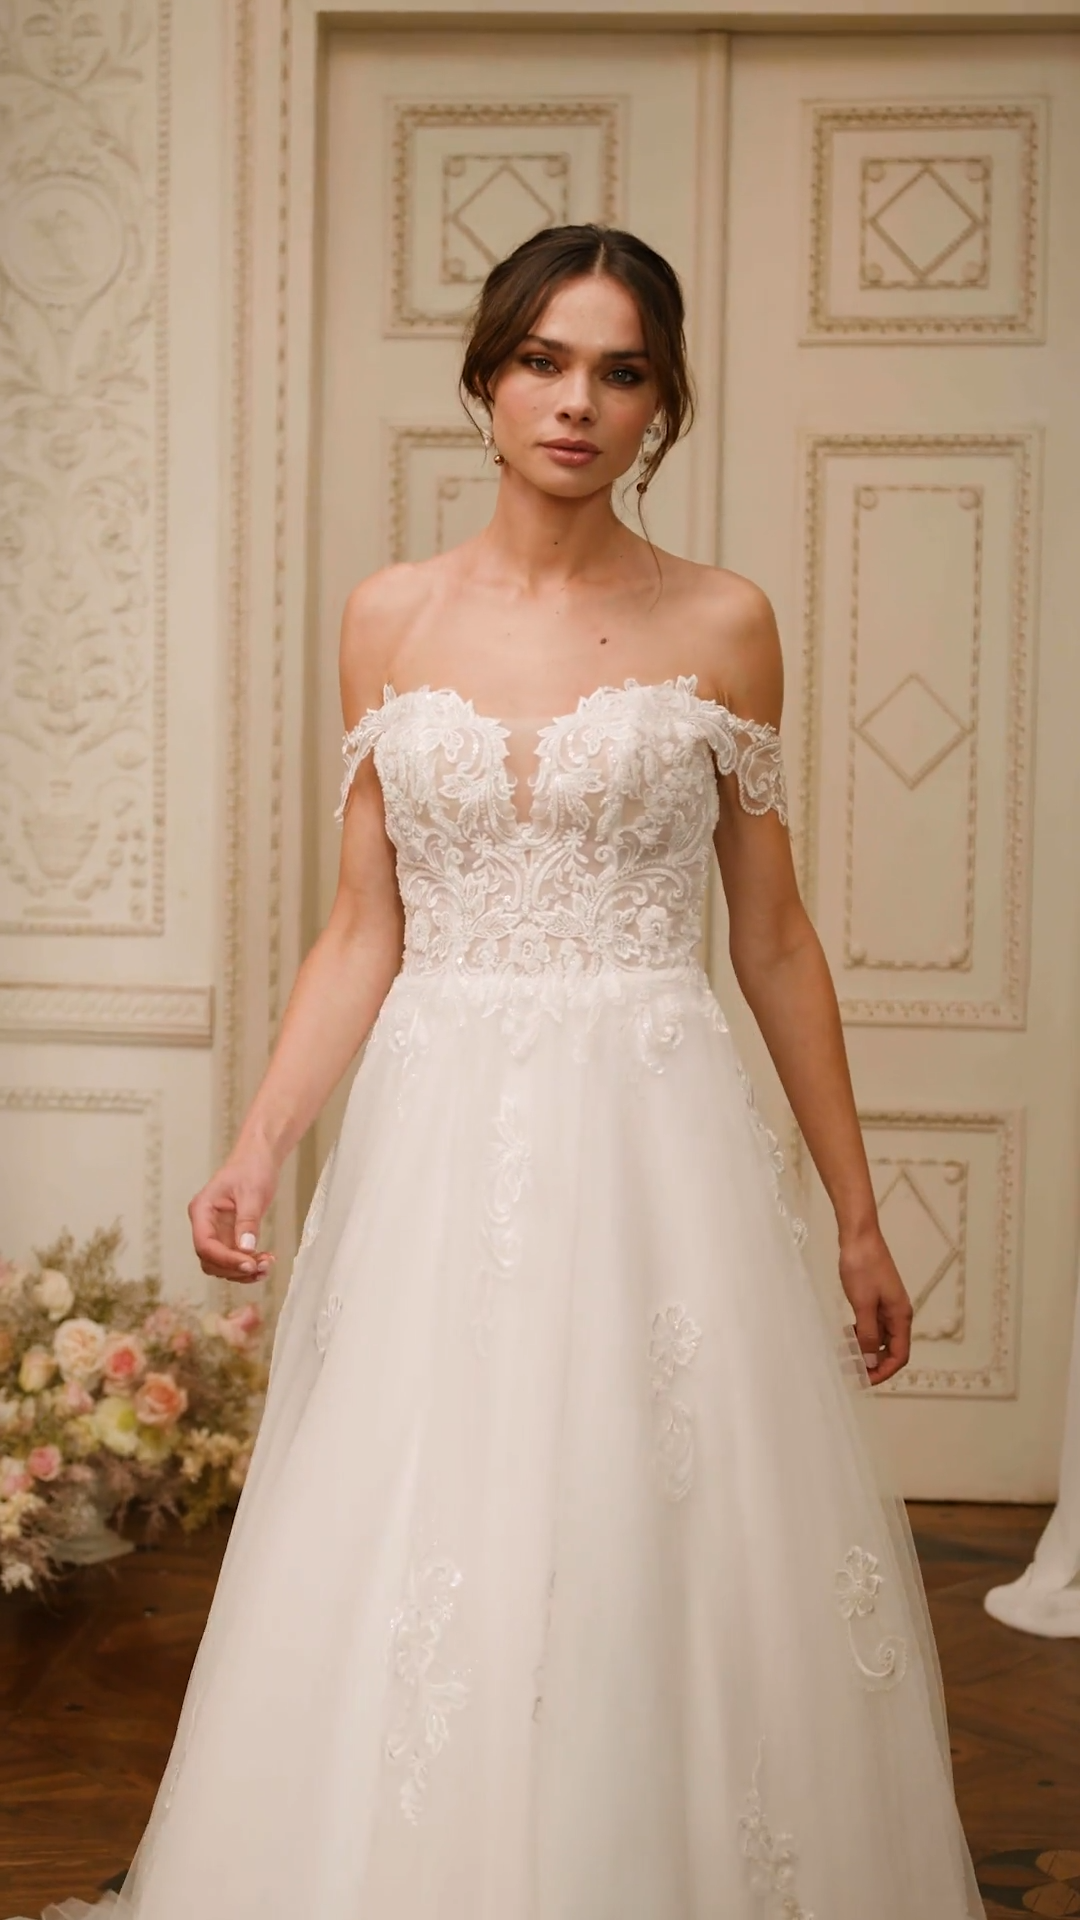 Moonlight Collection J6854 blush bridal gowns, ivory bridal gowns, white wedding dresses & more